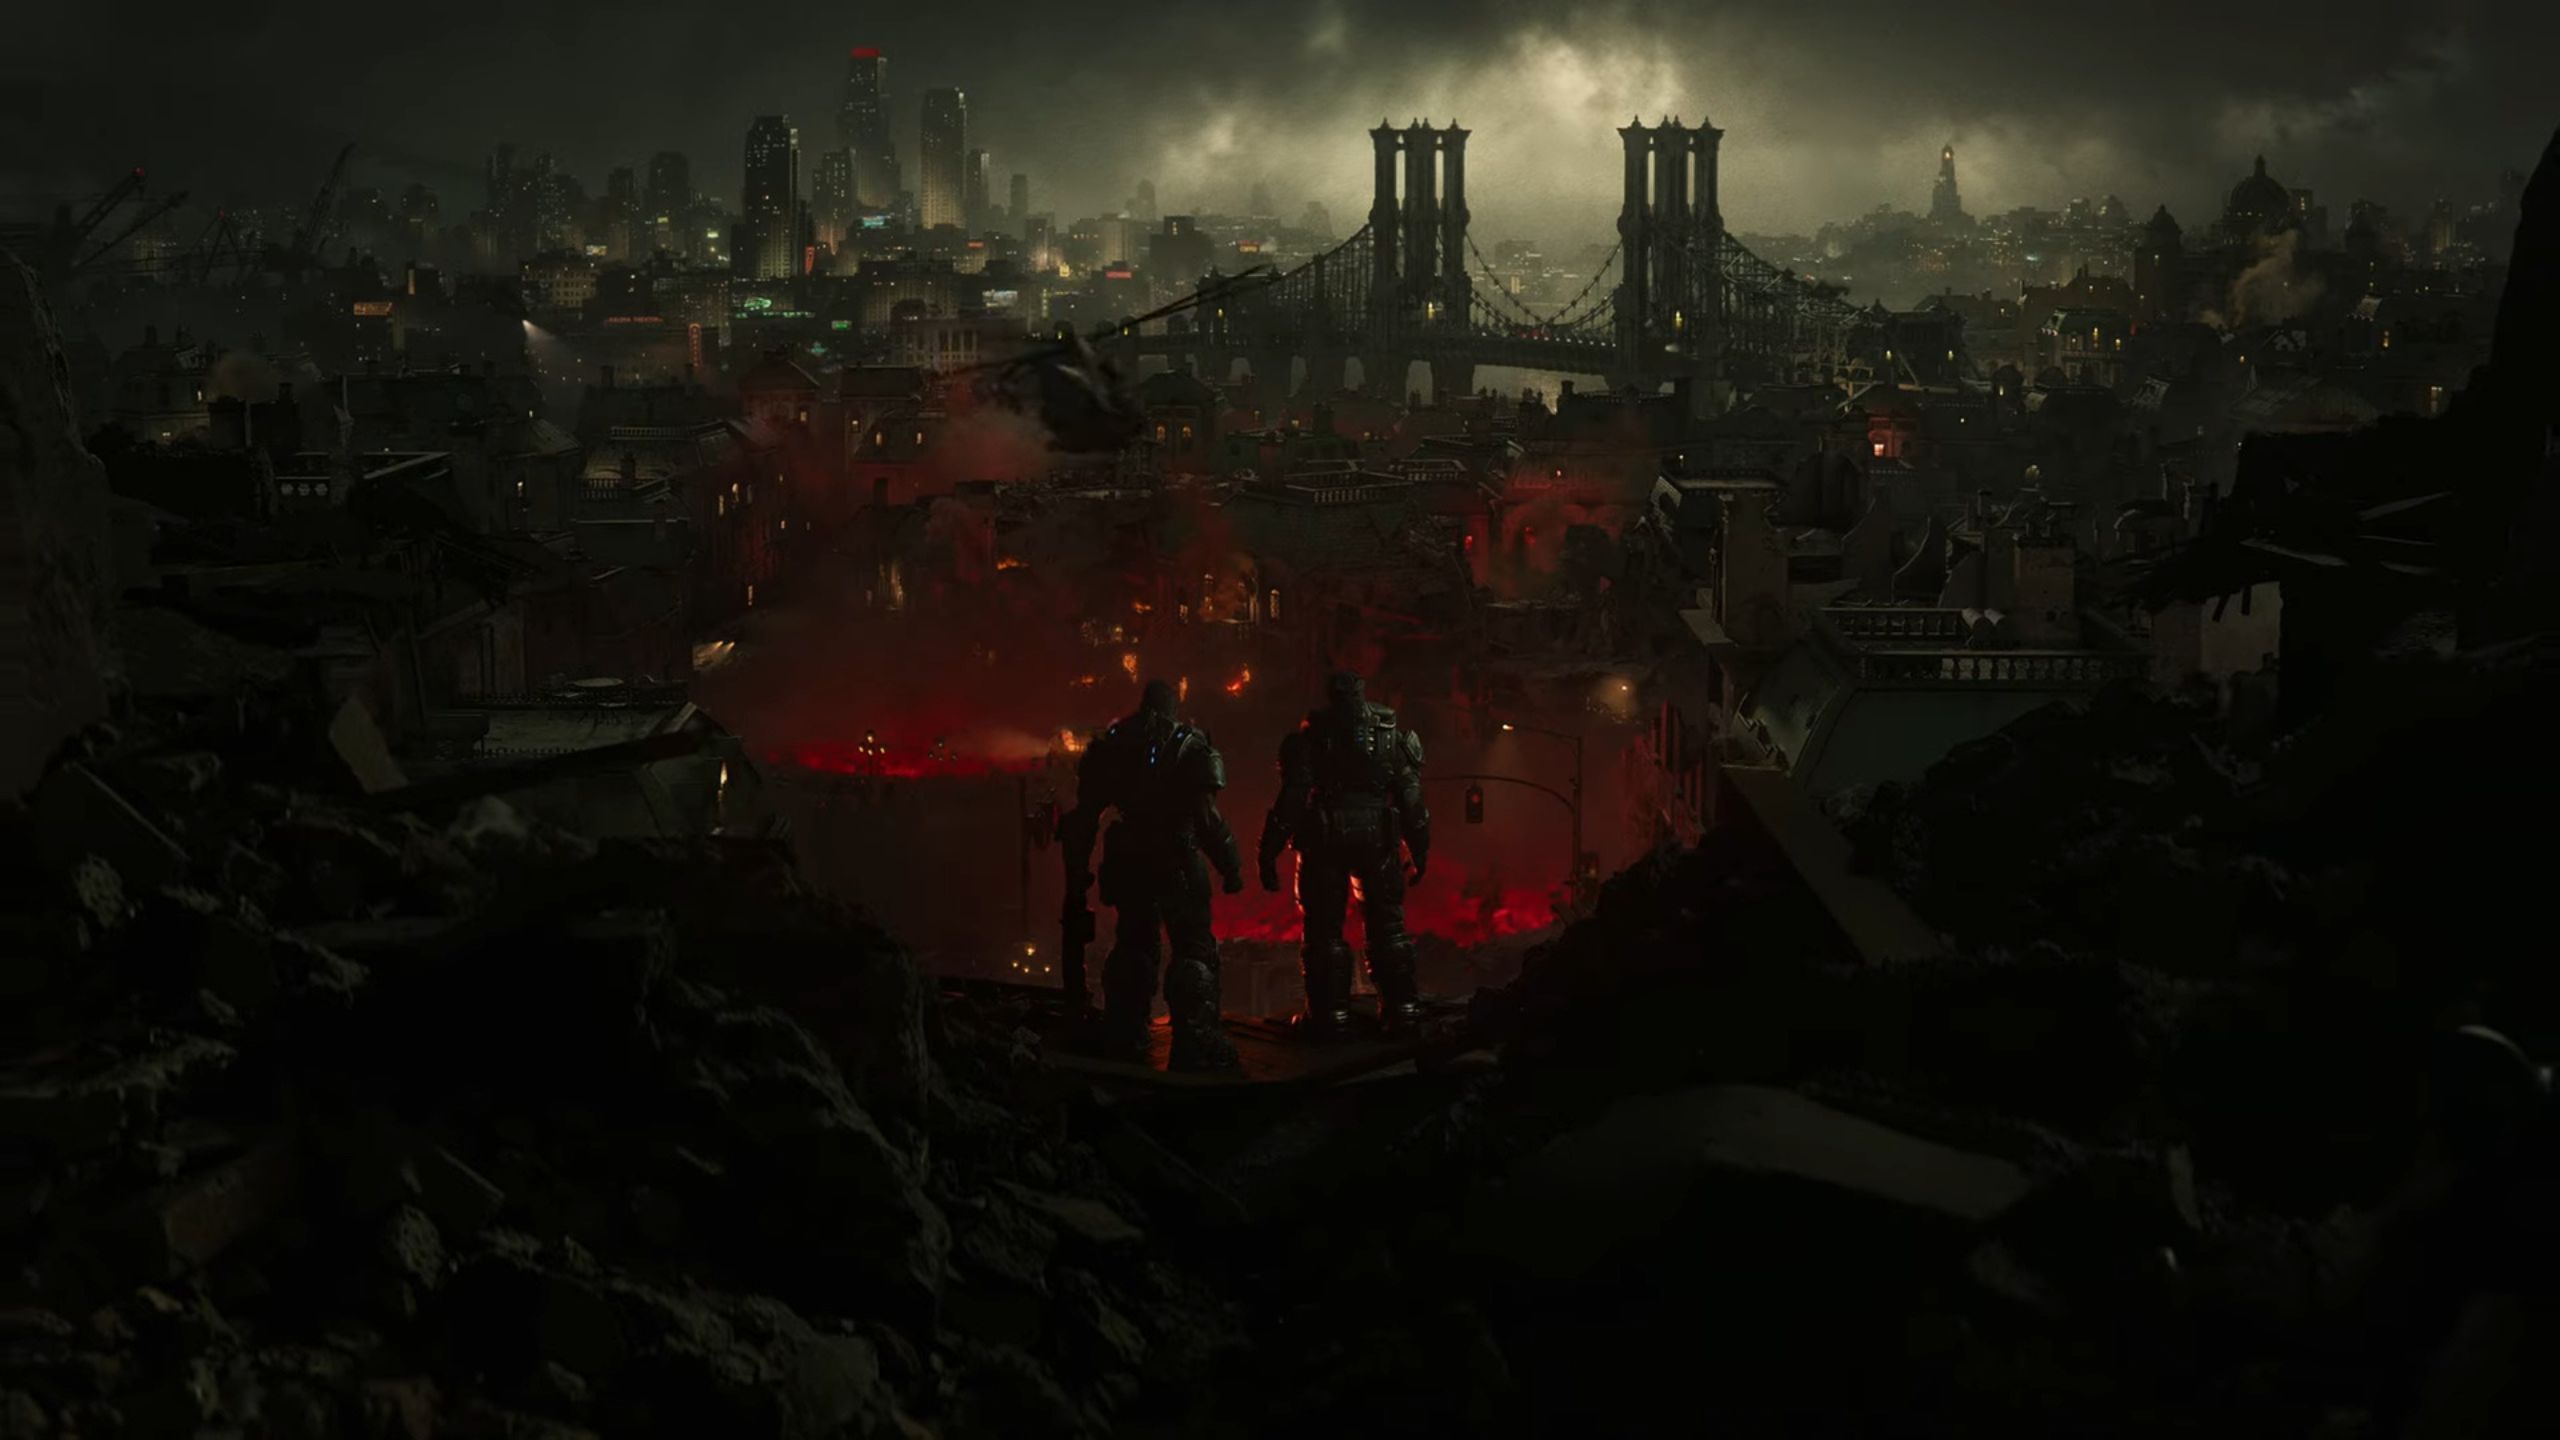 Marcus and Dom looking over a burning city.